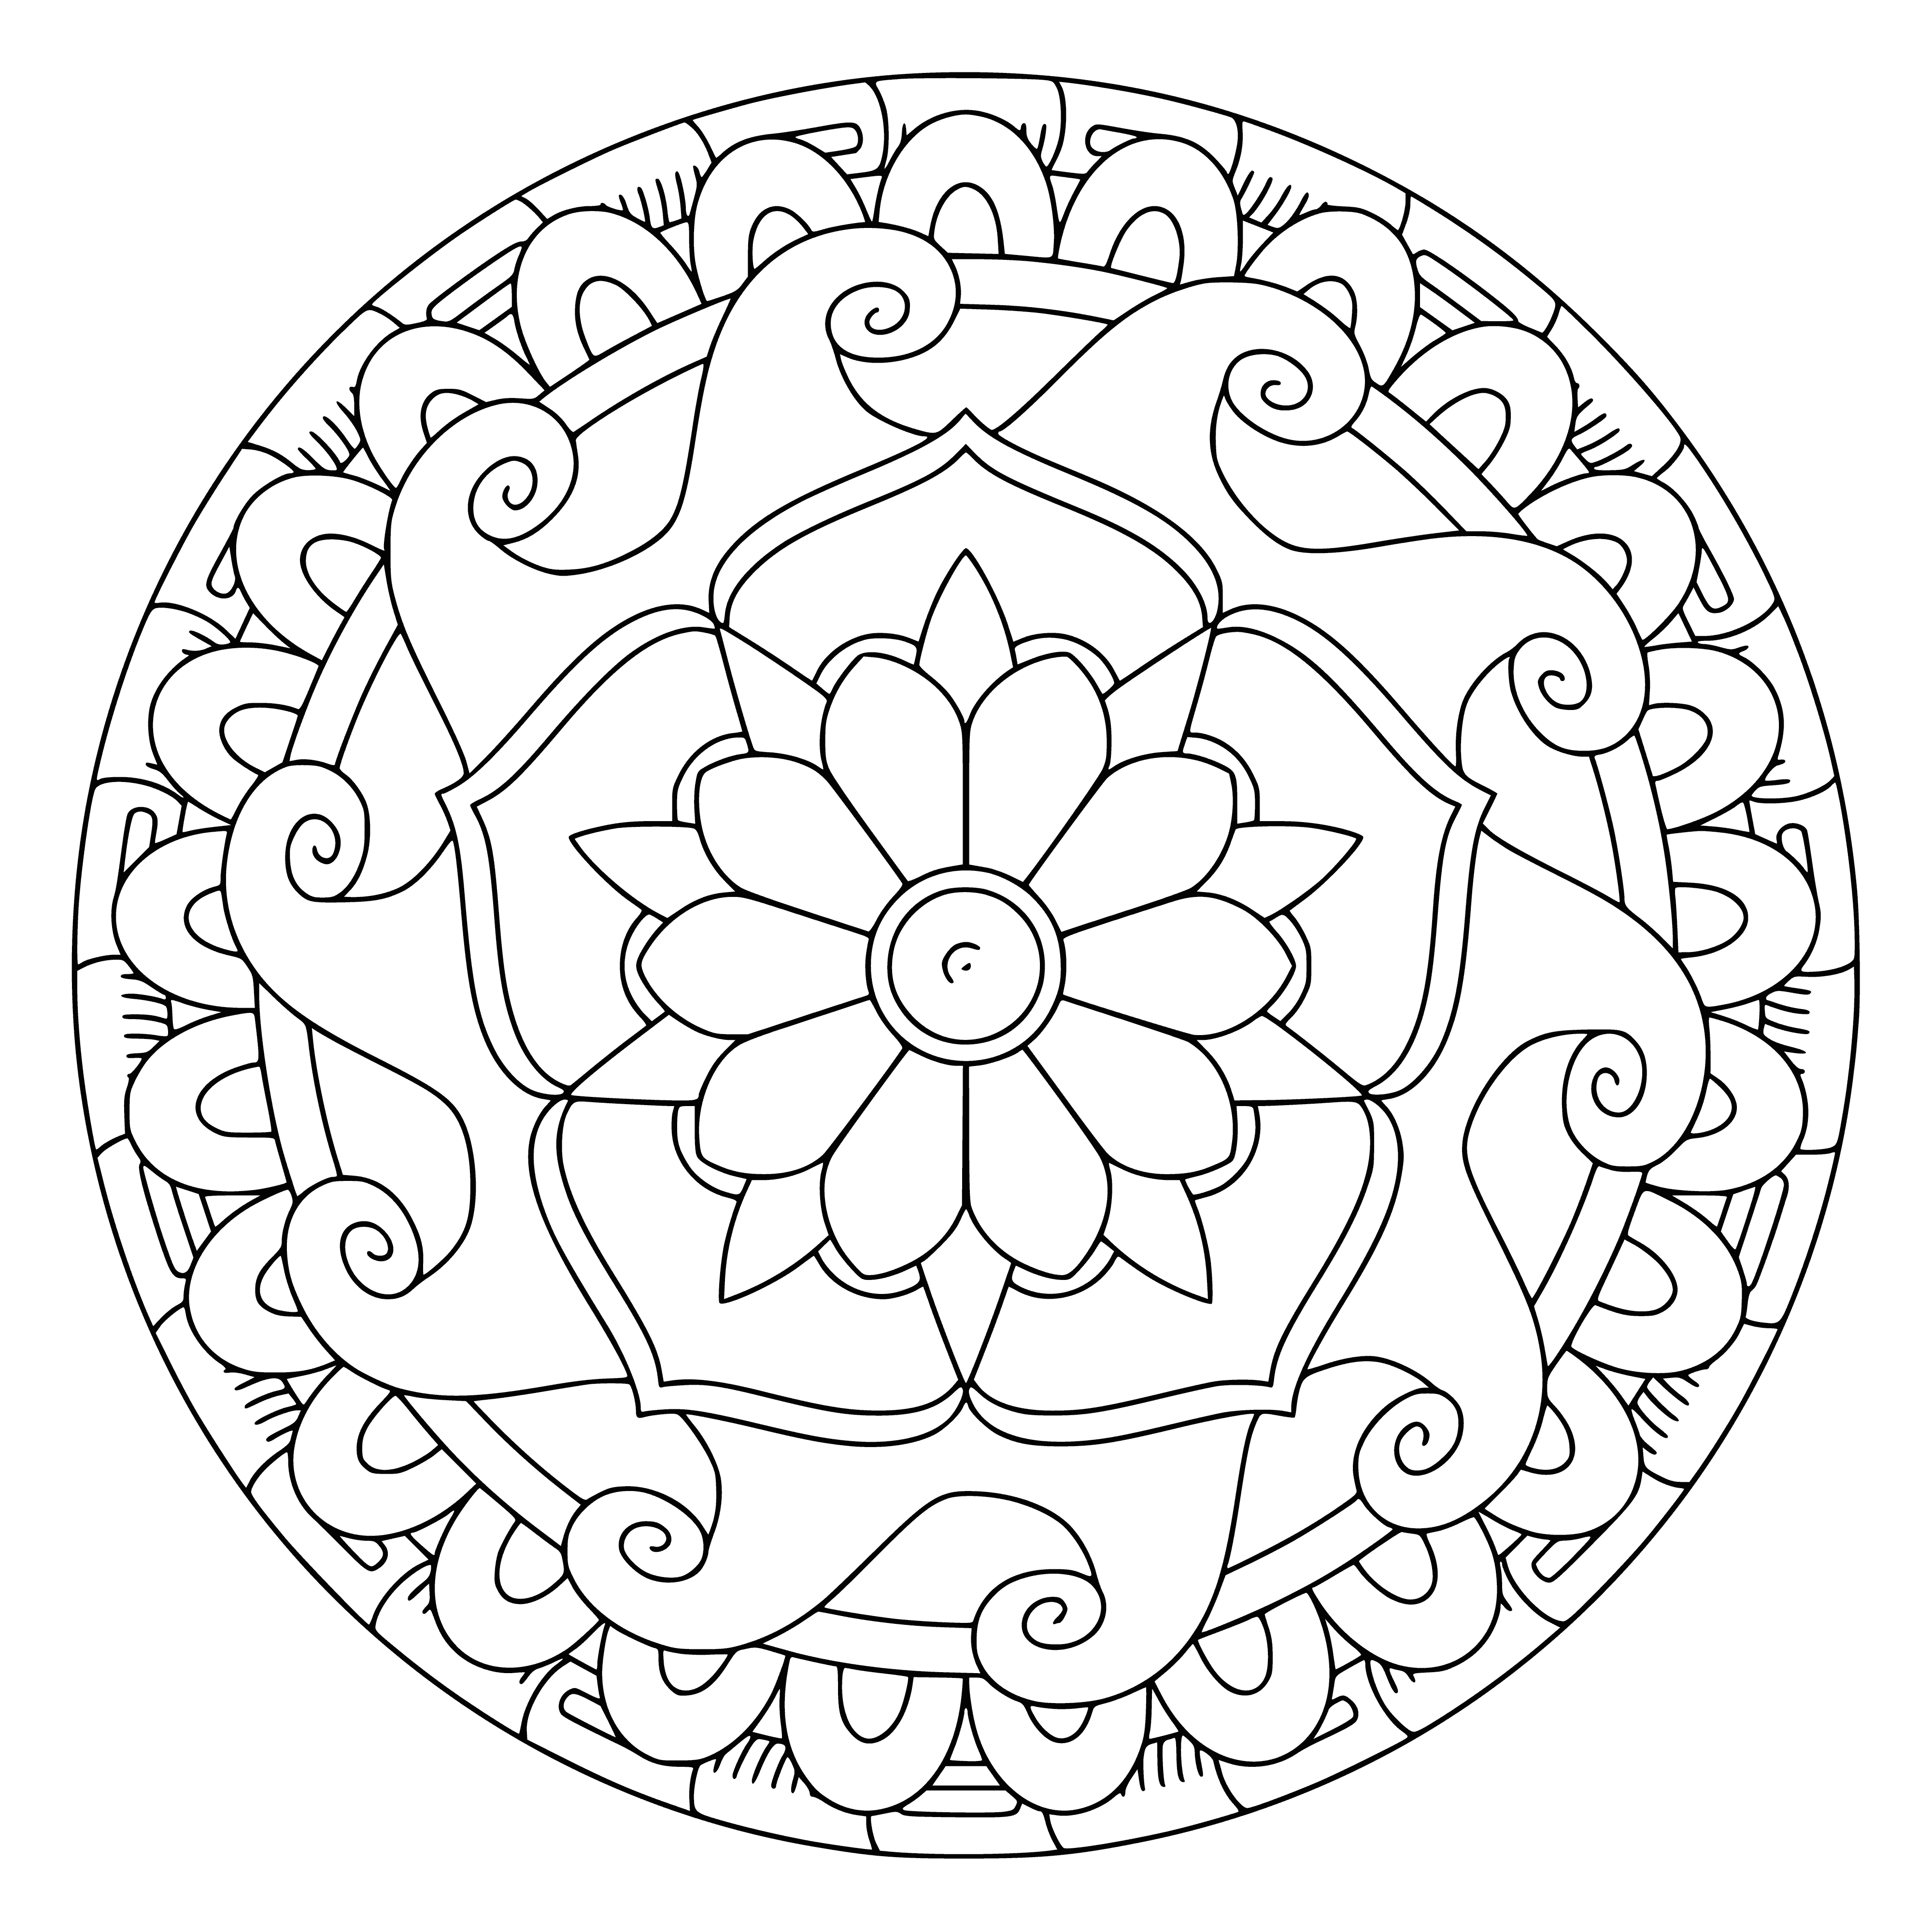 coloring page: Mandala circles arranged to create flower shape; decorated w/ geometric pattern.